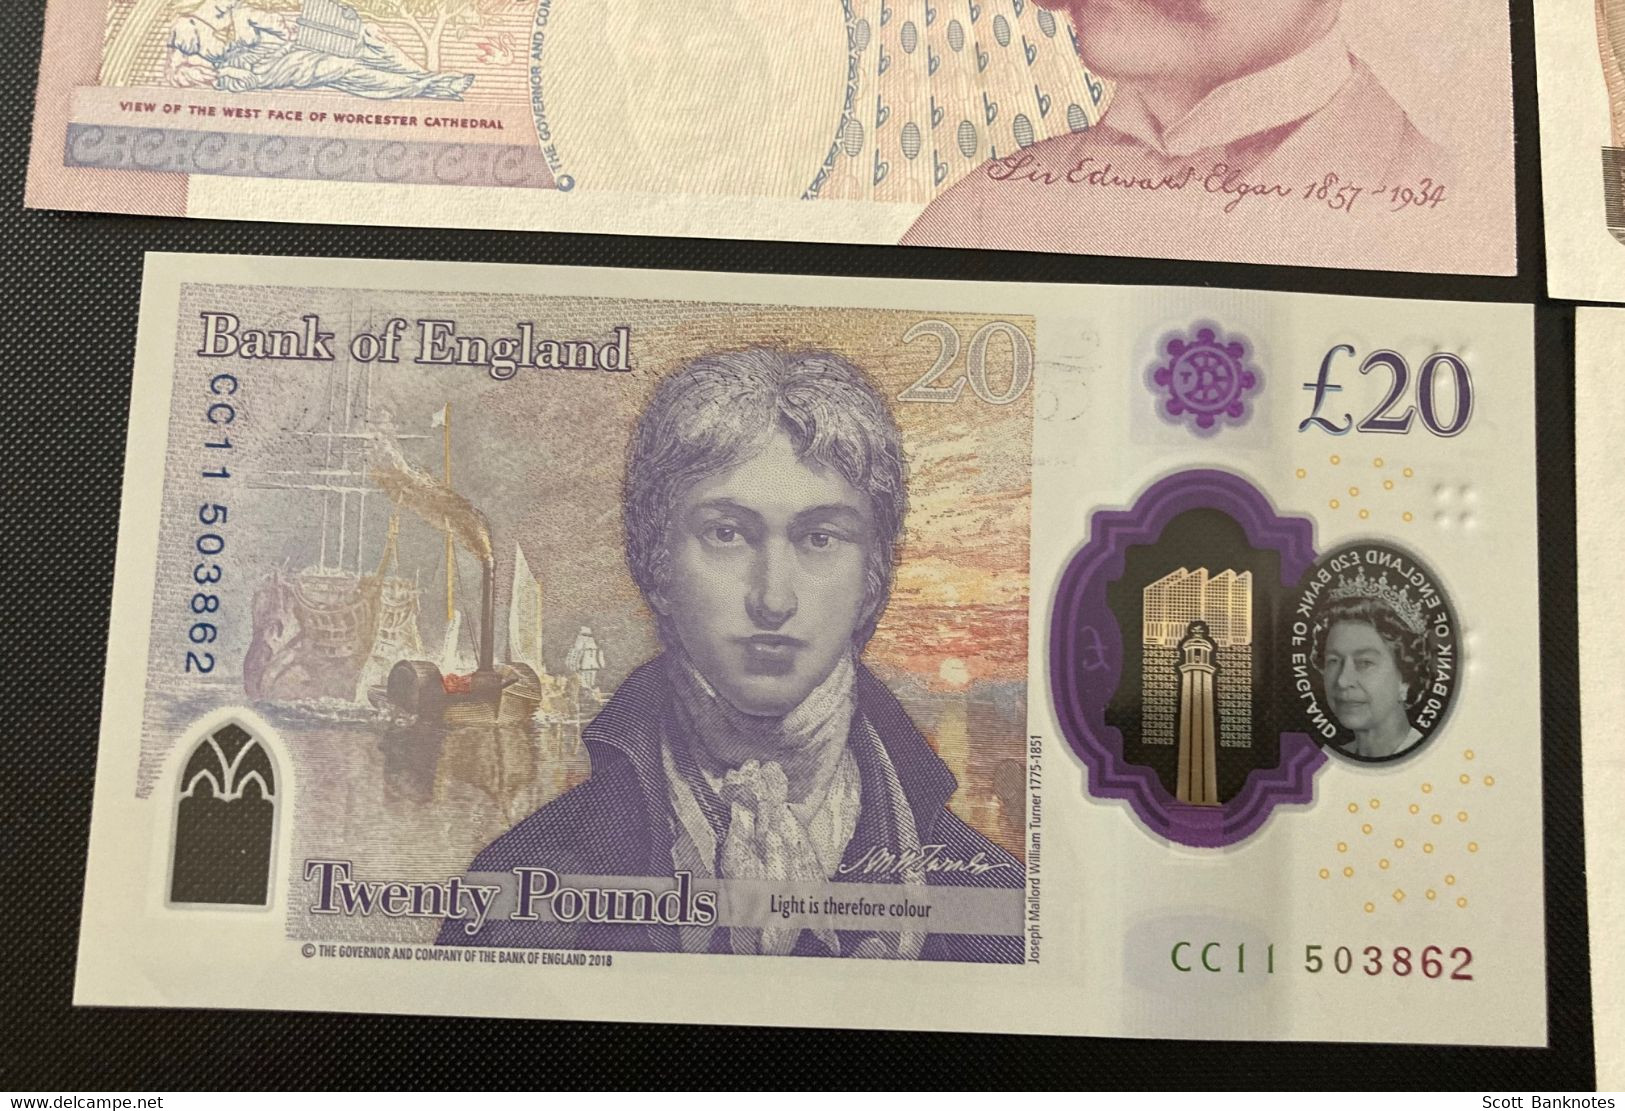 55 Pounds Bank of England Banknotes.